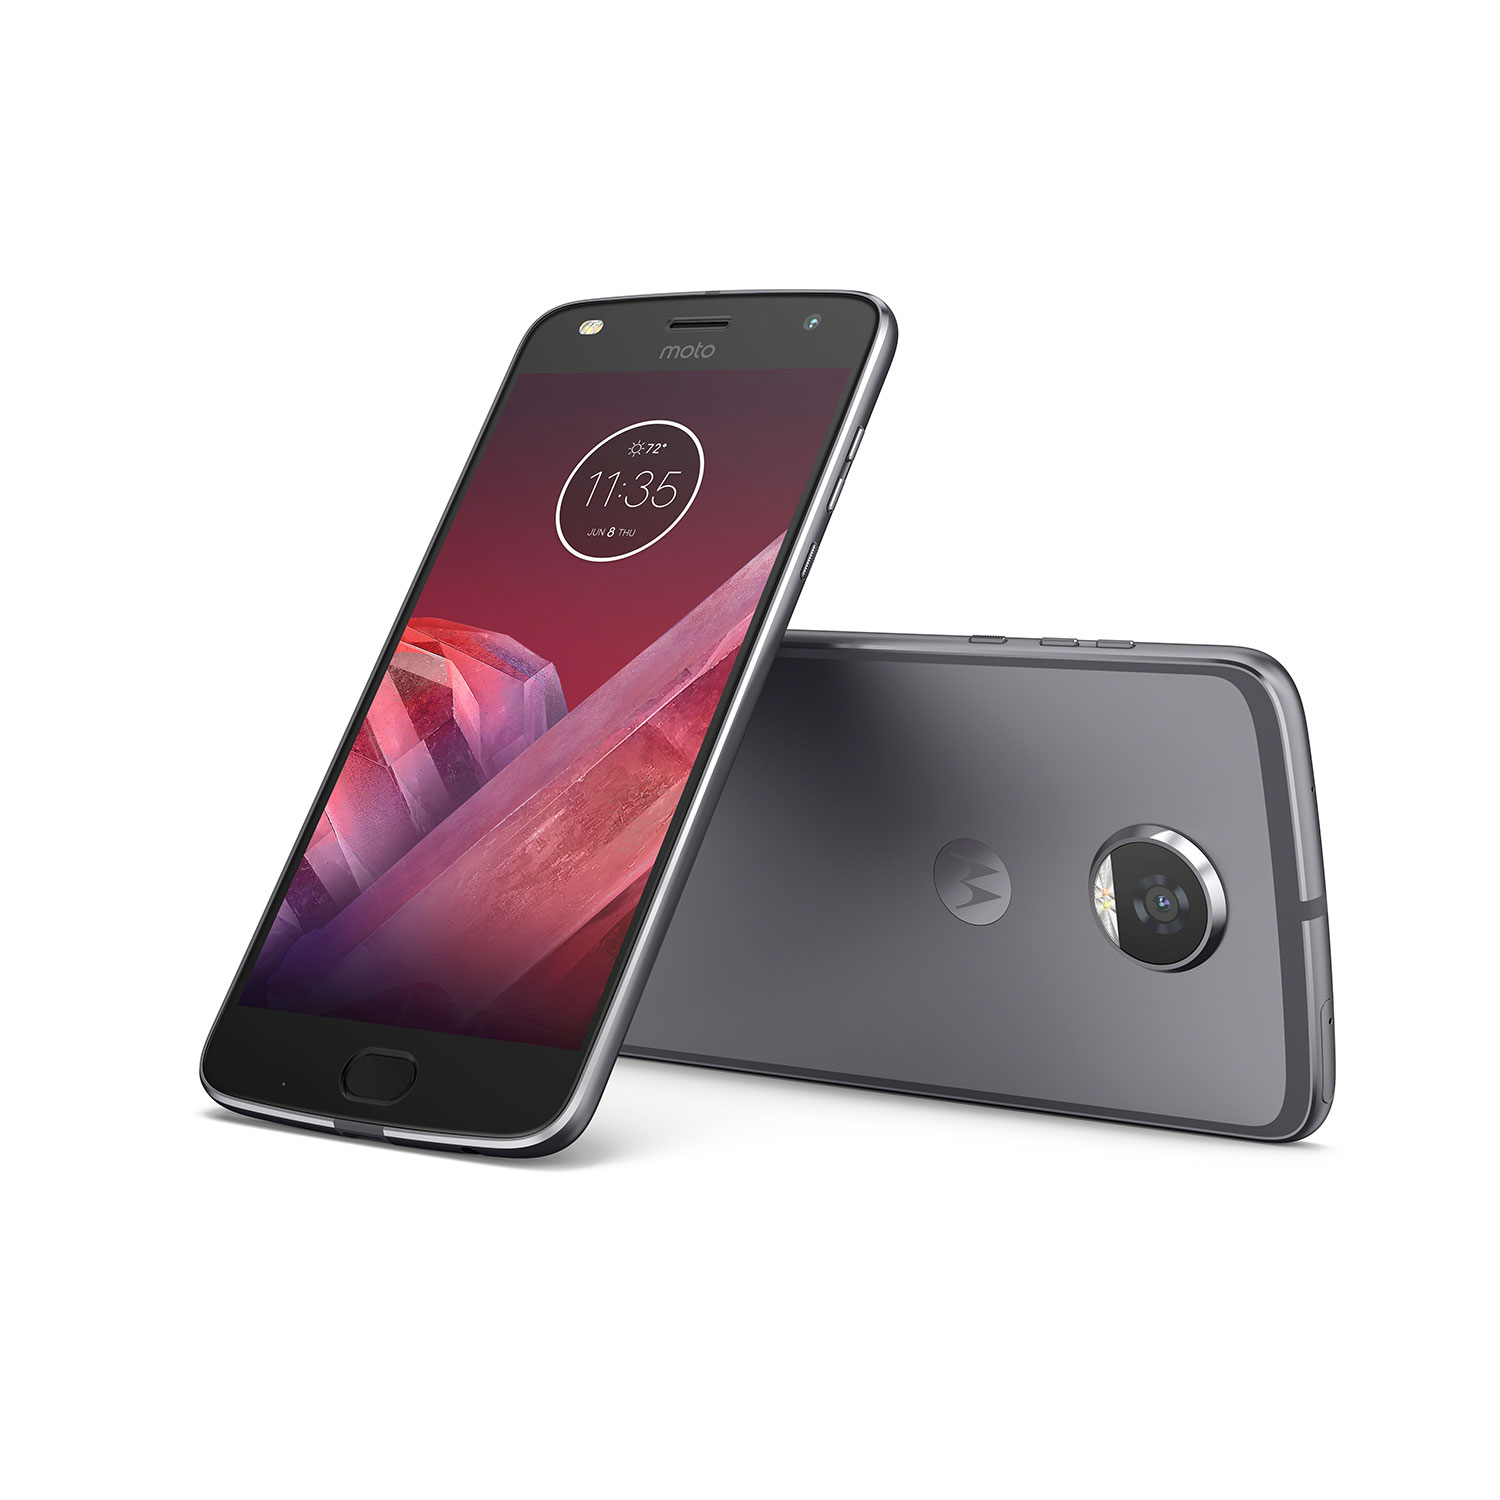 Moto Z2 Play To Launch in Malaysia Next Week